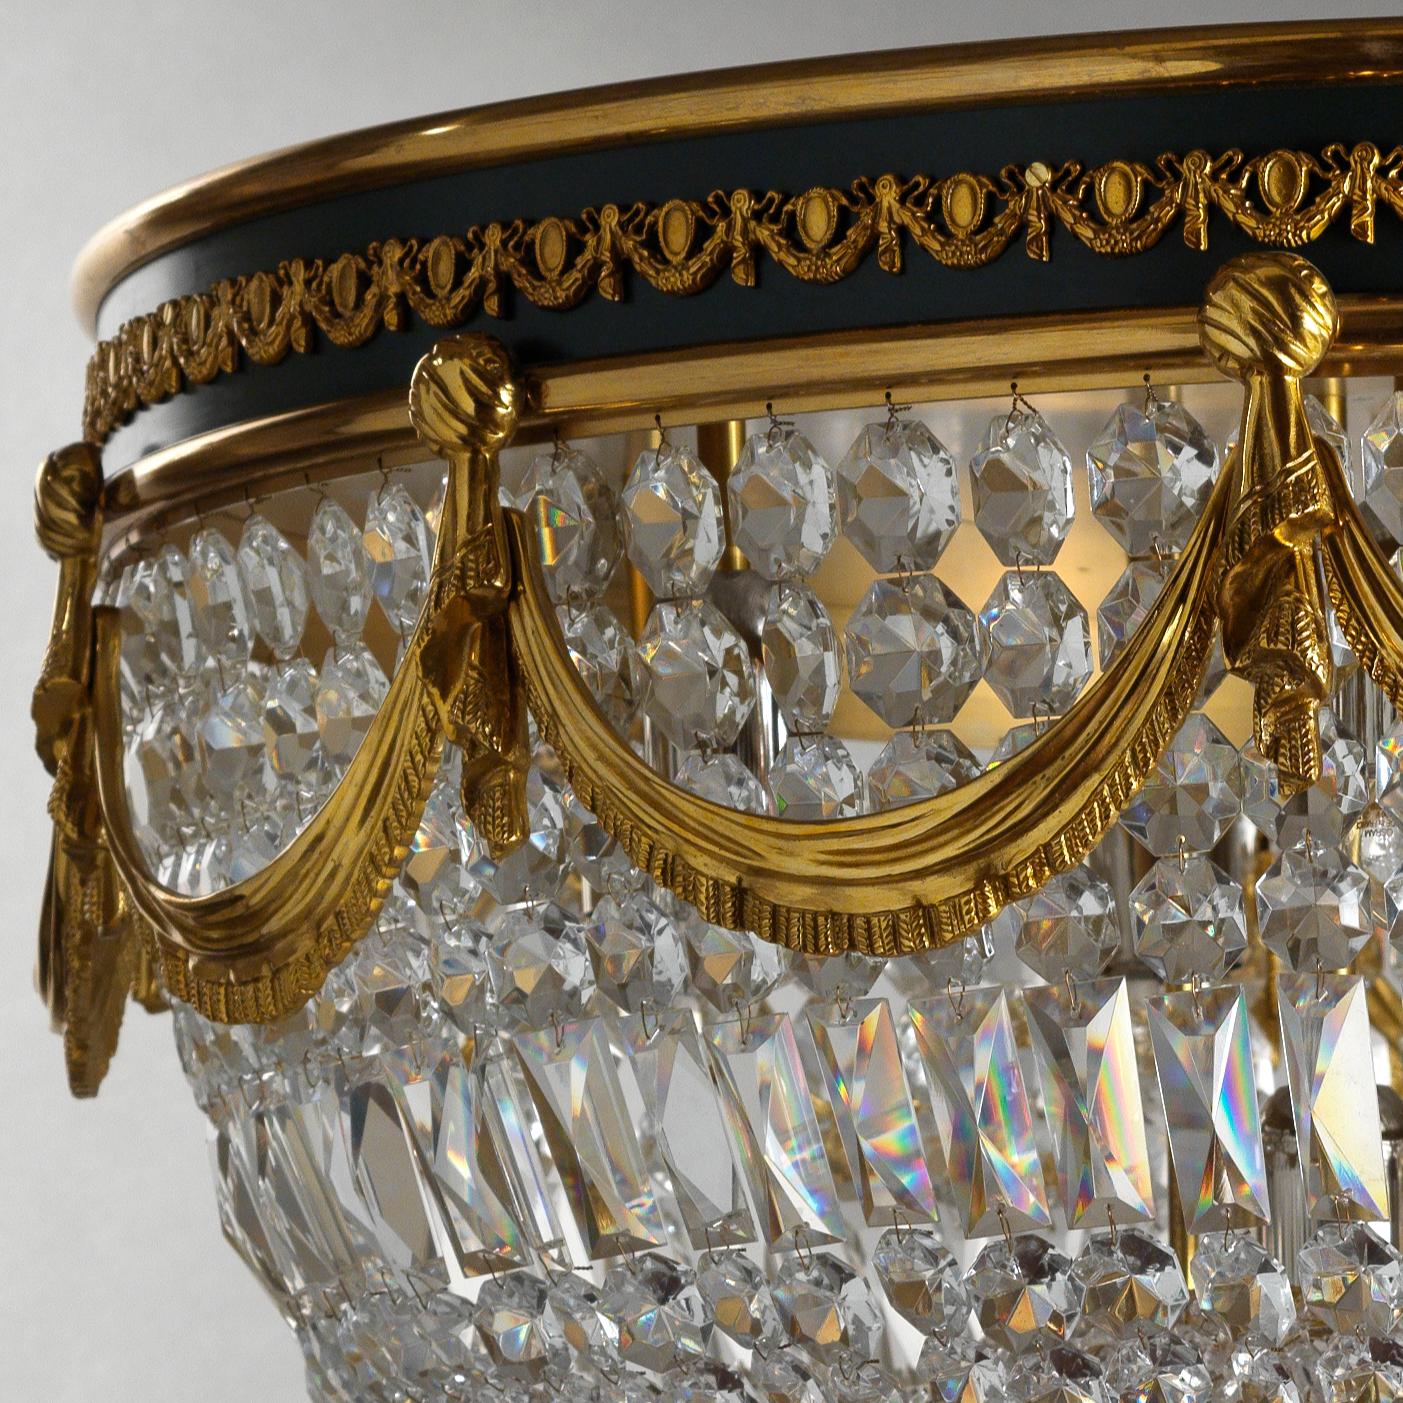 This large Neoclassical Style Gilt Bronze Flush Mount Fixture by Gherardo Degli Albizzi features high quality details. The gilt bronze main band is characterized by two circular profiles with a green enameled band. Within this is applied a festoon